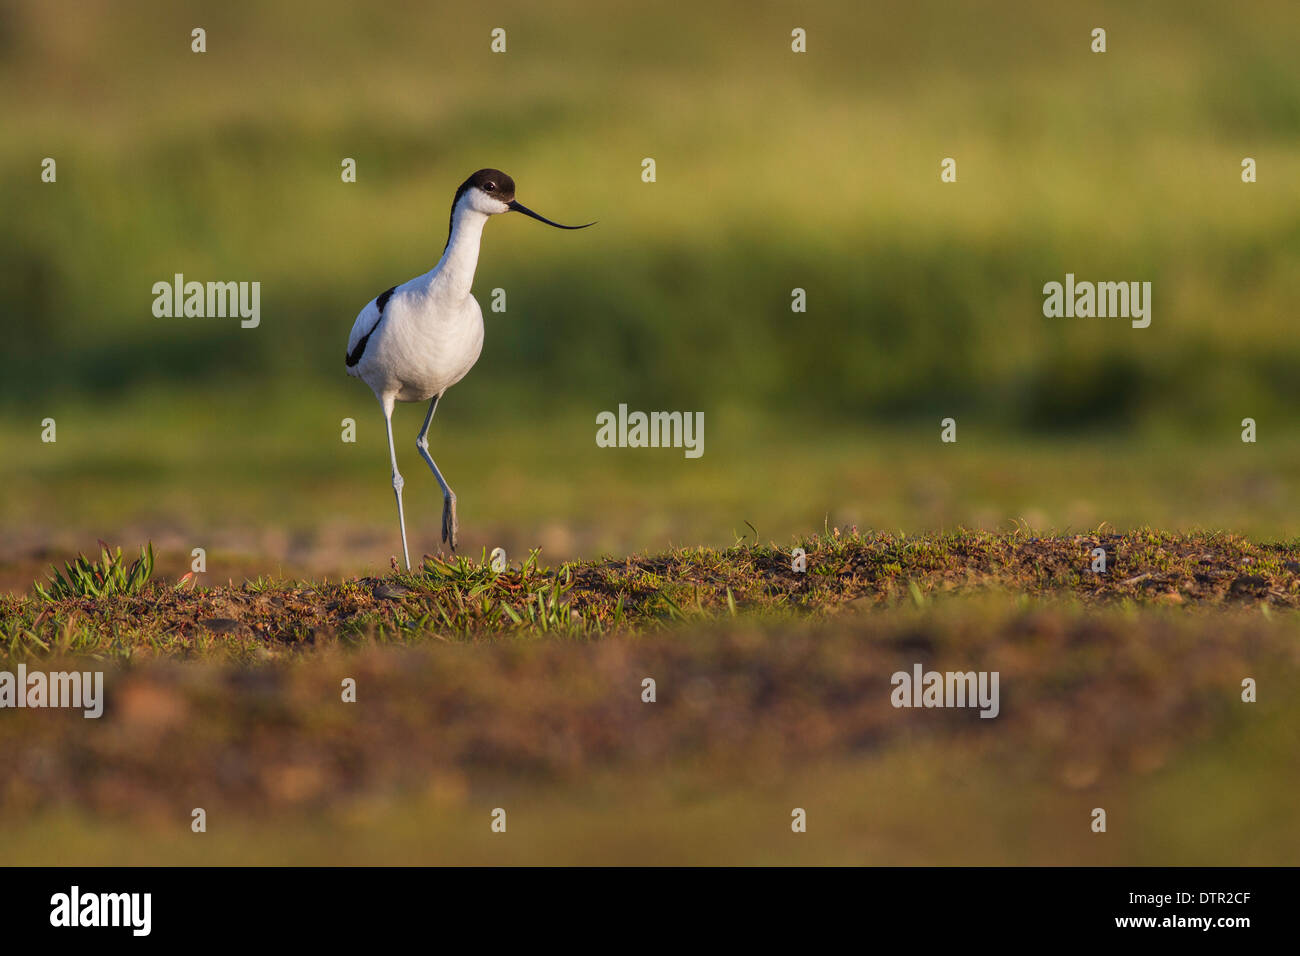 Avocette in early morning light Banque D'Images